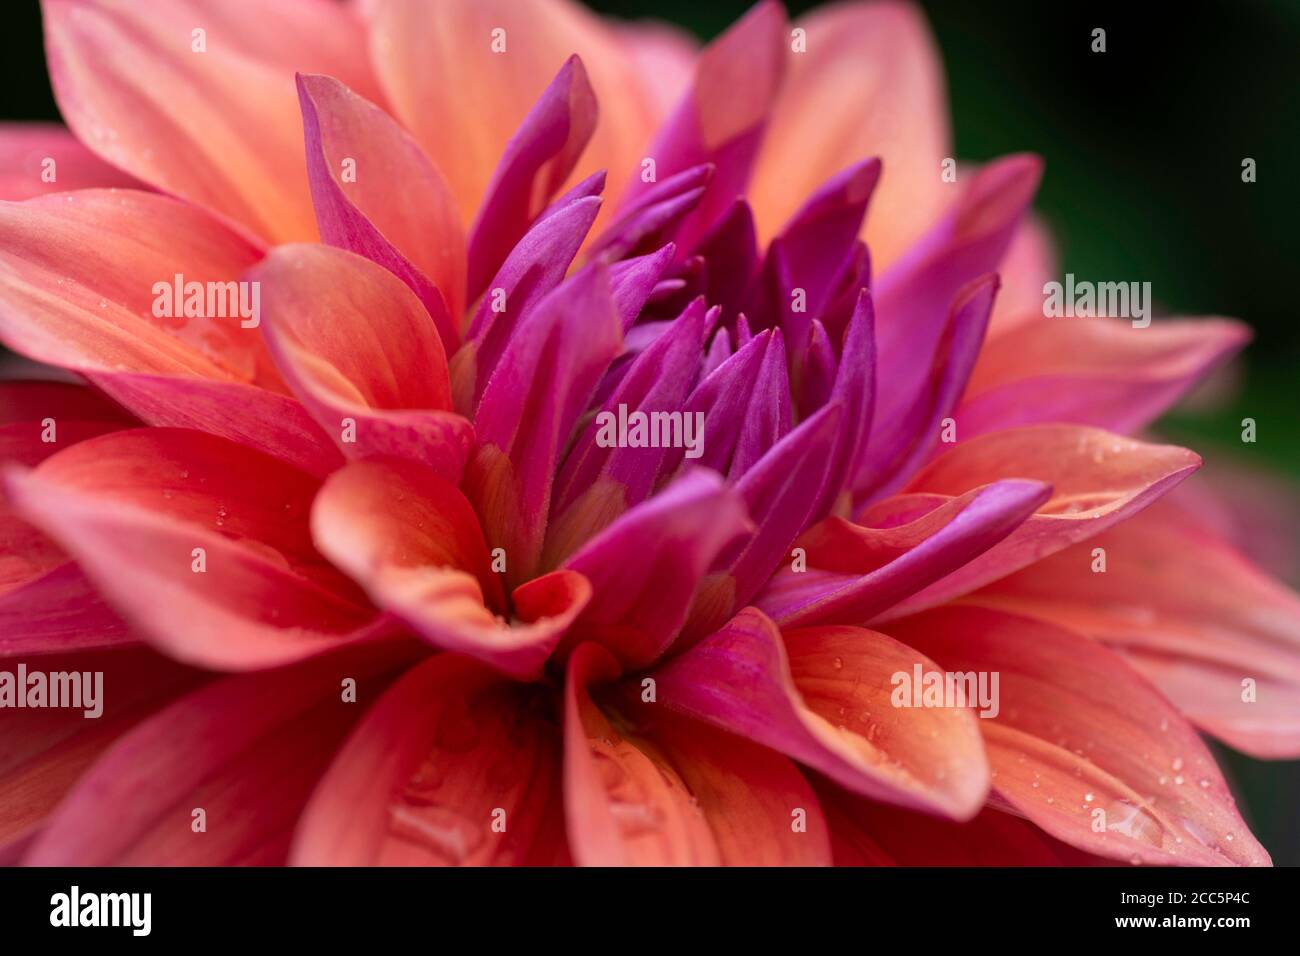 A Dahlia flower in full bloom with unusual coloring shades from orange to dark pink Stock Photo